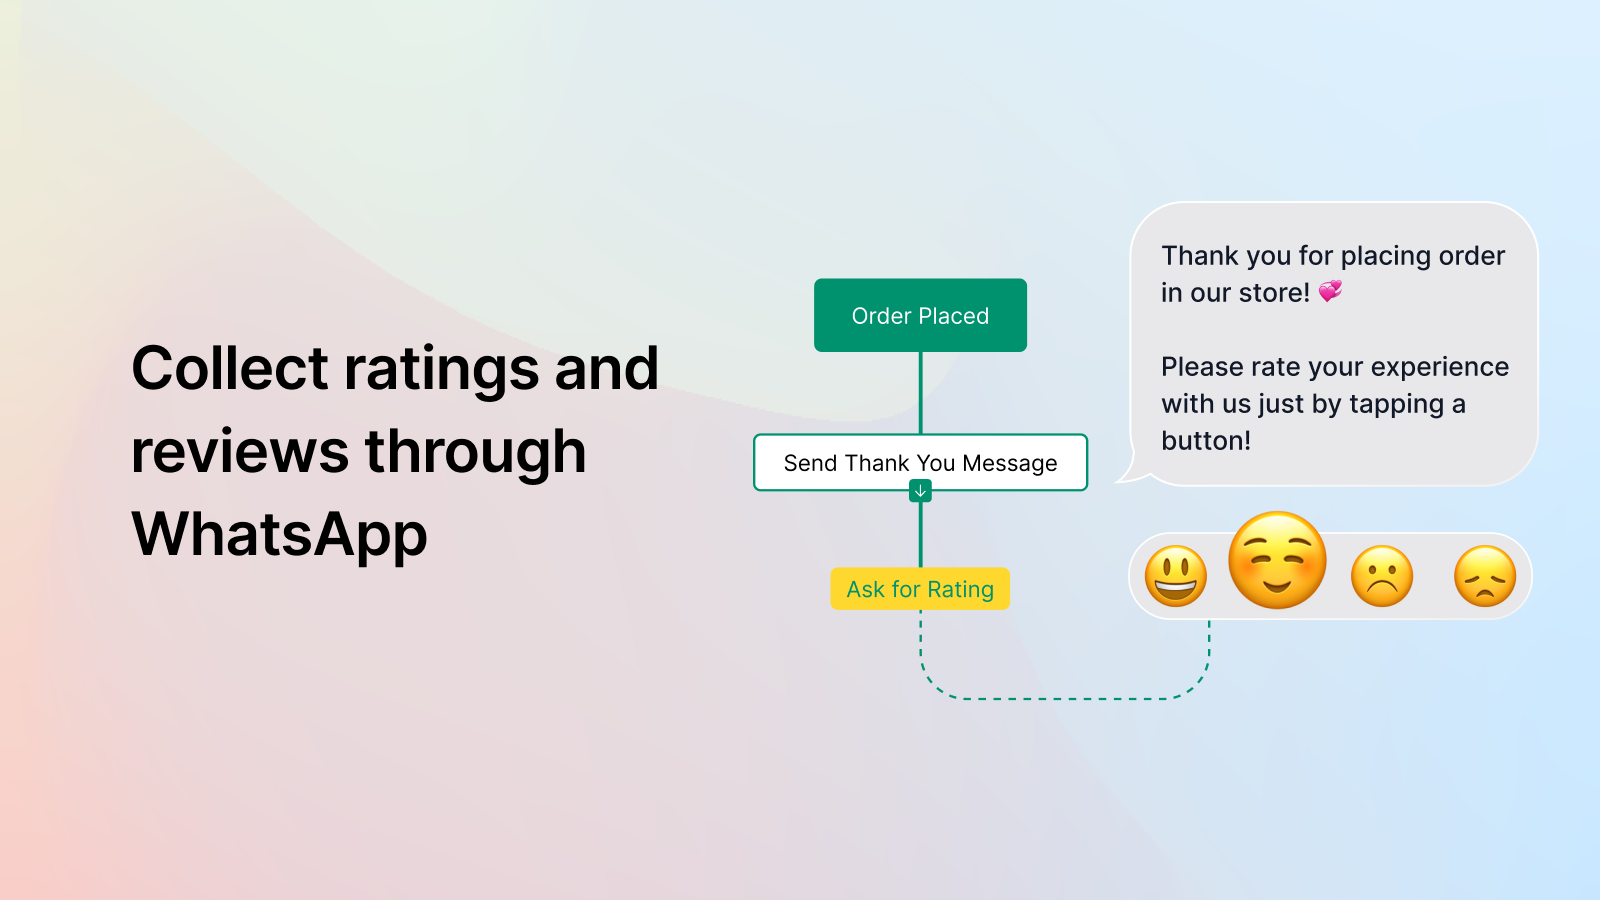 Collect ratings and reviews via WhatsApp